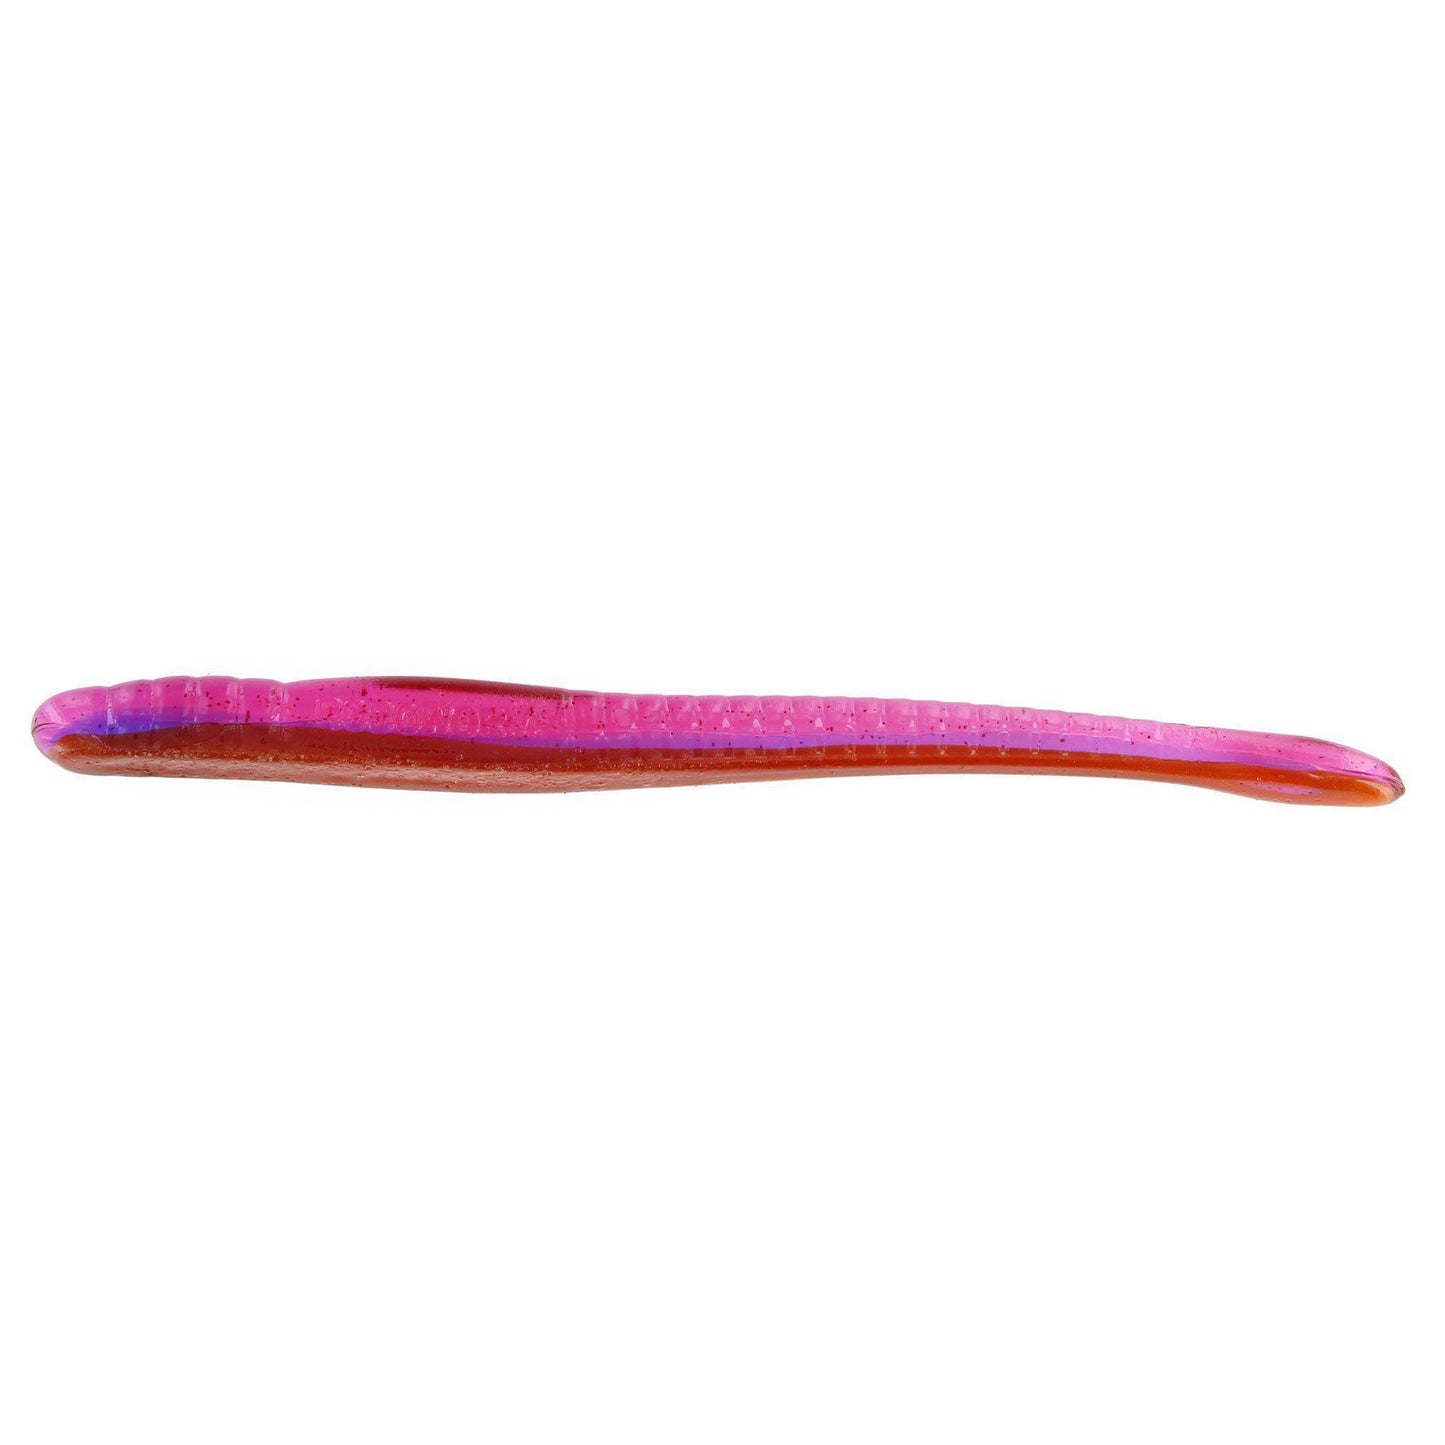 Roboworm Straight Tail Worm